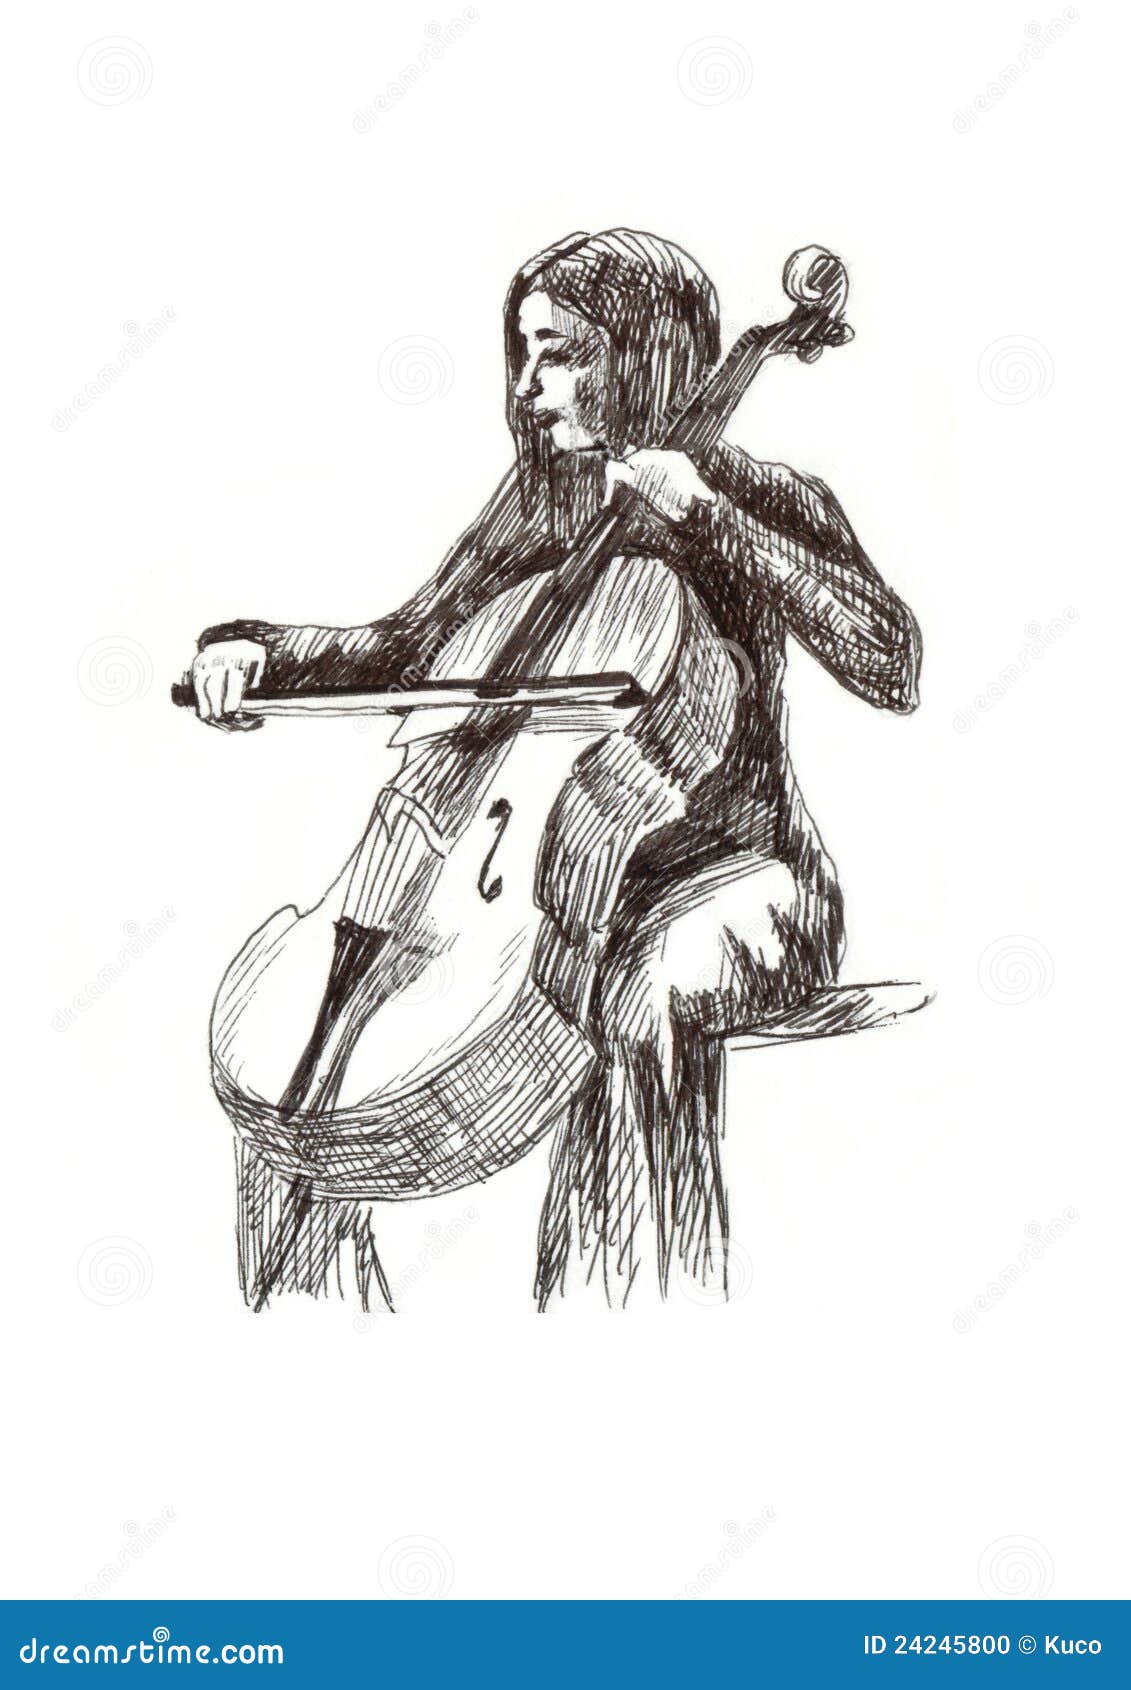 How to Draw a Cello  DrawingNow